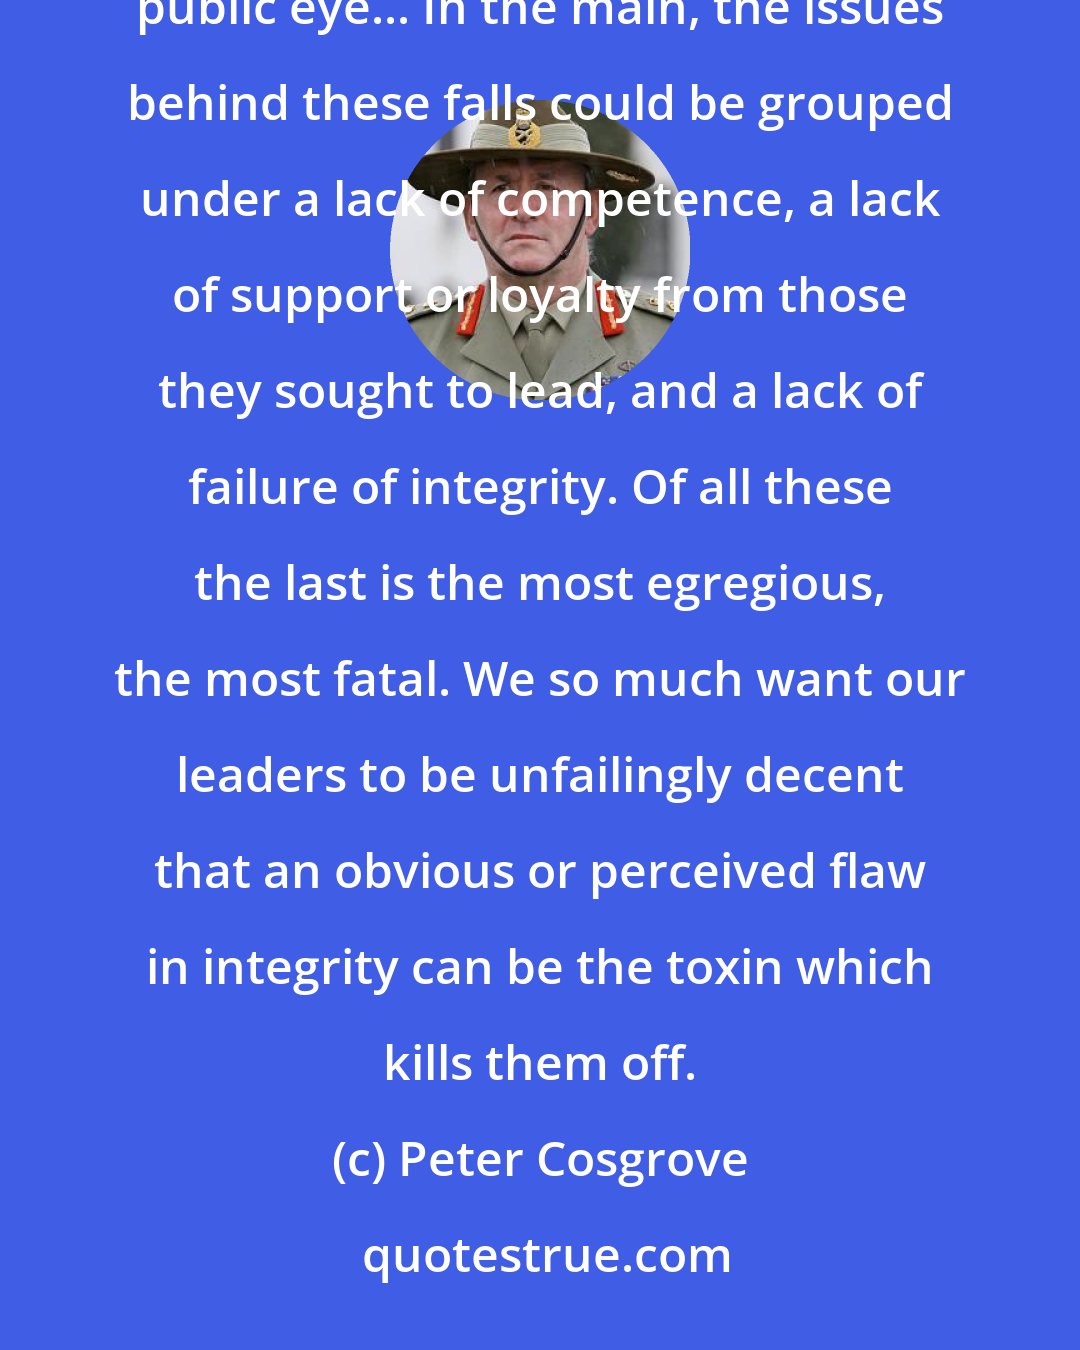 Peter Cosgrove: It's instructive to consider the more spectacular and well-known falls from grace of leaders in the public eye... In the main, the issues behind these falls could be grouped under a lack of competence, a lack of support or loyalty from those they sought to lead, and a lack of failure of integrity. Of all these the last is the most egregious, the most fatal. We so much want our leaders to be unfailingly decent that an obvious or perceived flaw in integrity can be the toxin which kills them off.